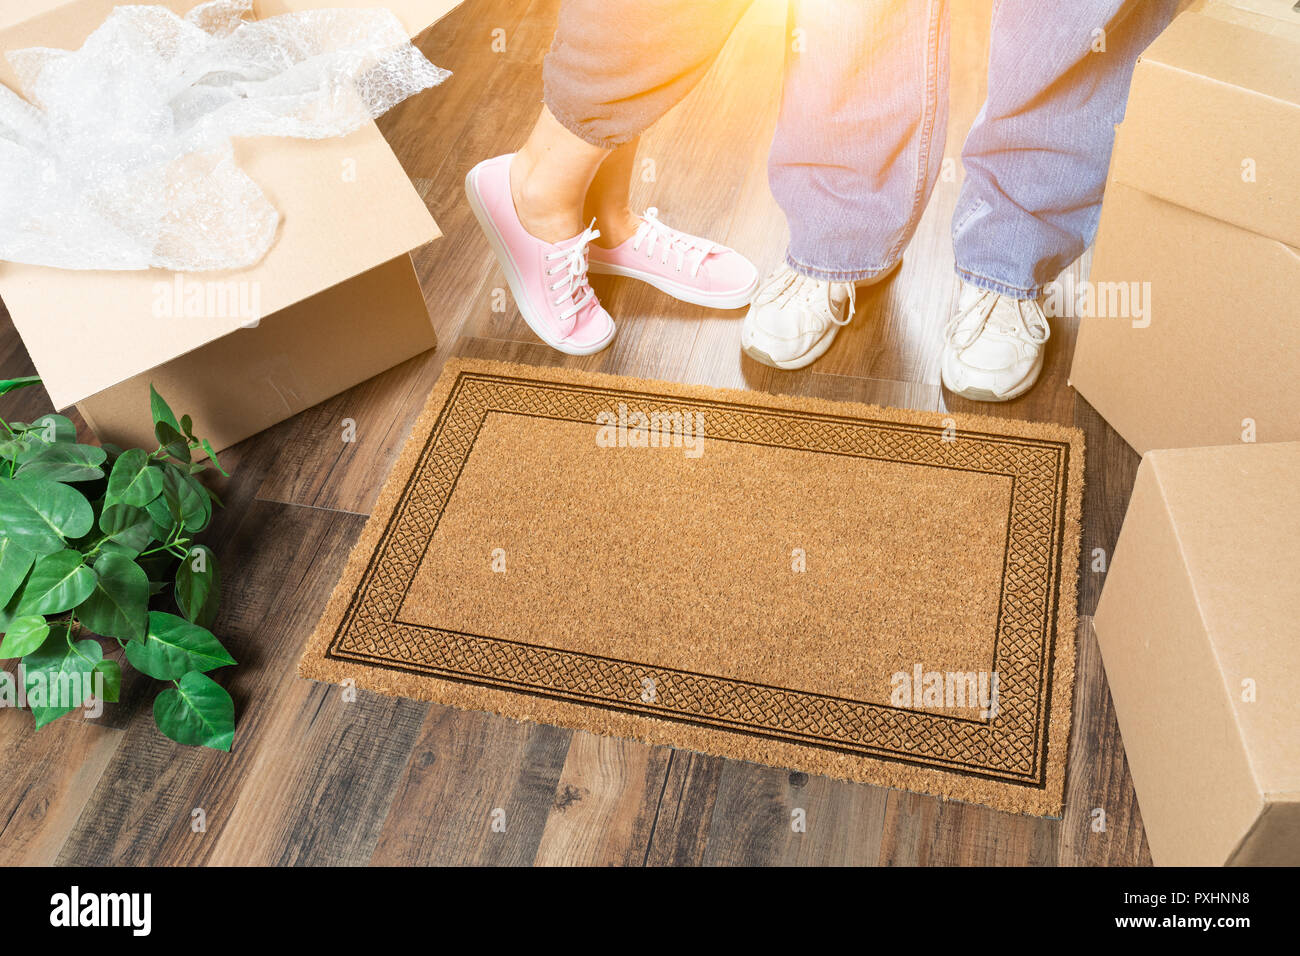 Man and Woman Standing Near Blank Welcome Mat, Moving Boxes and Plant. Stock Photo